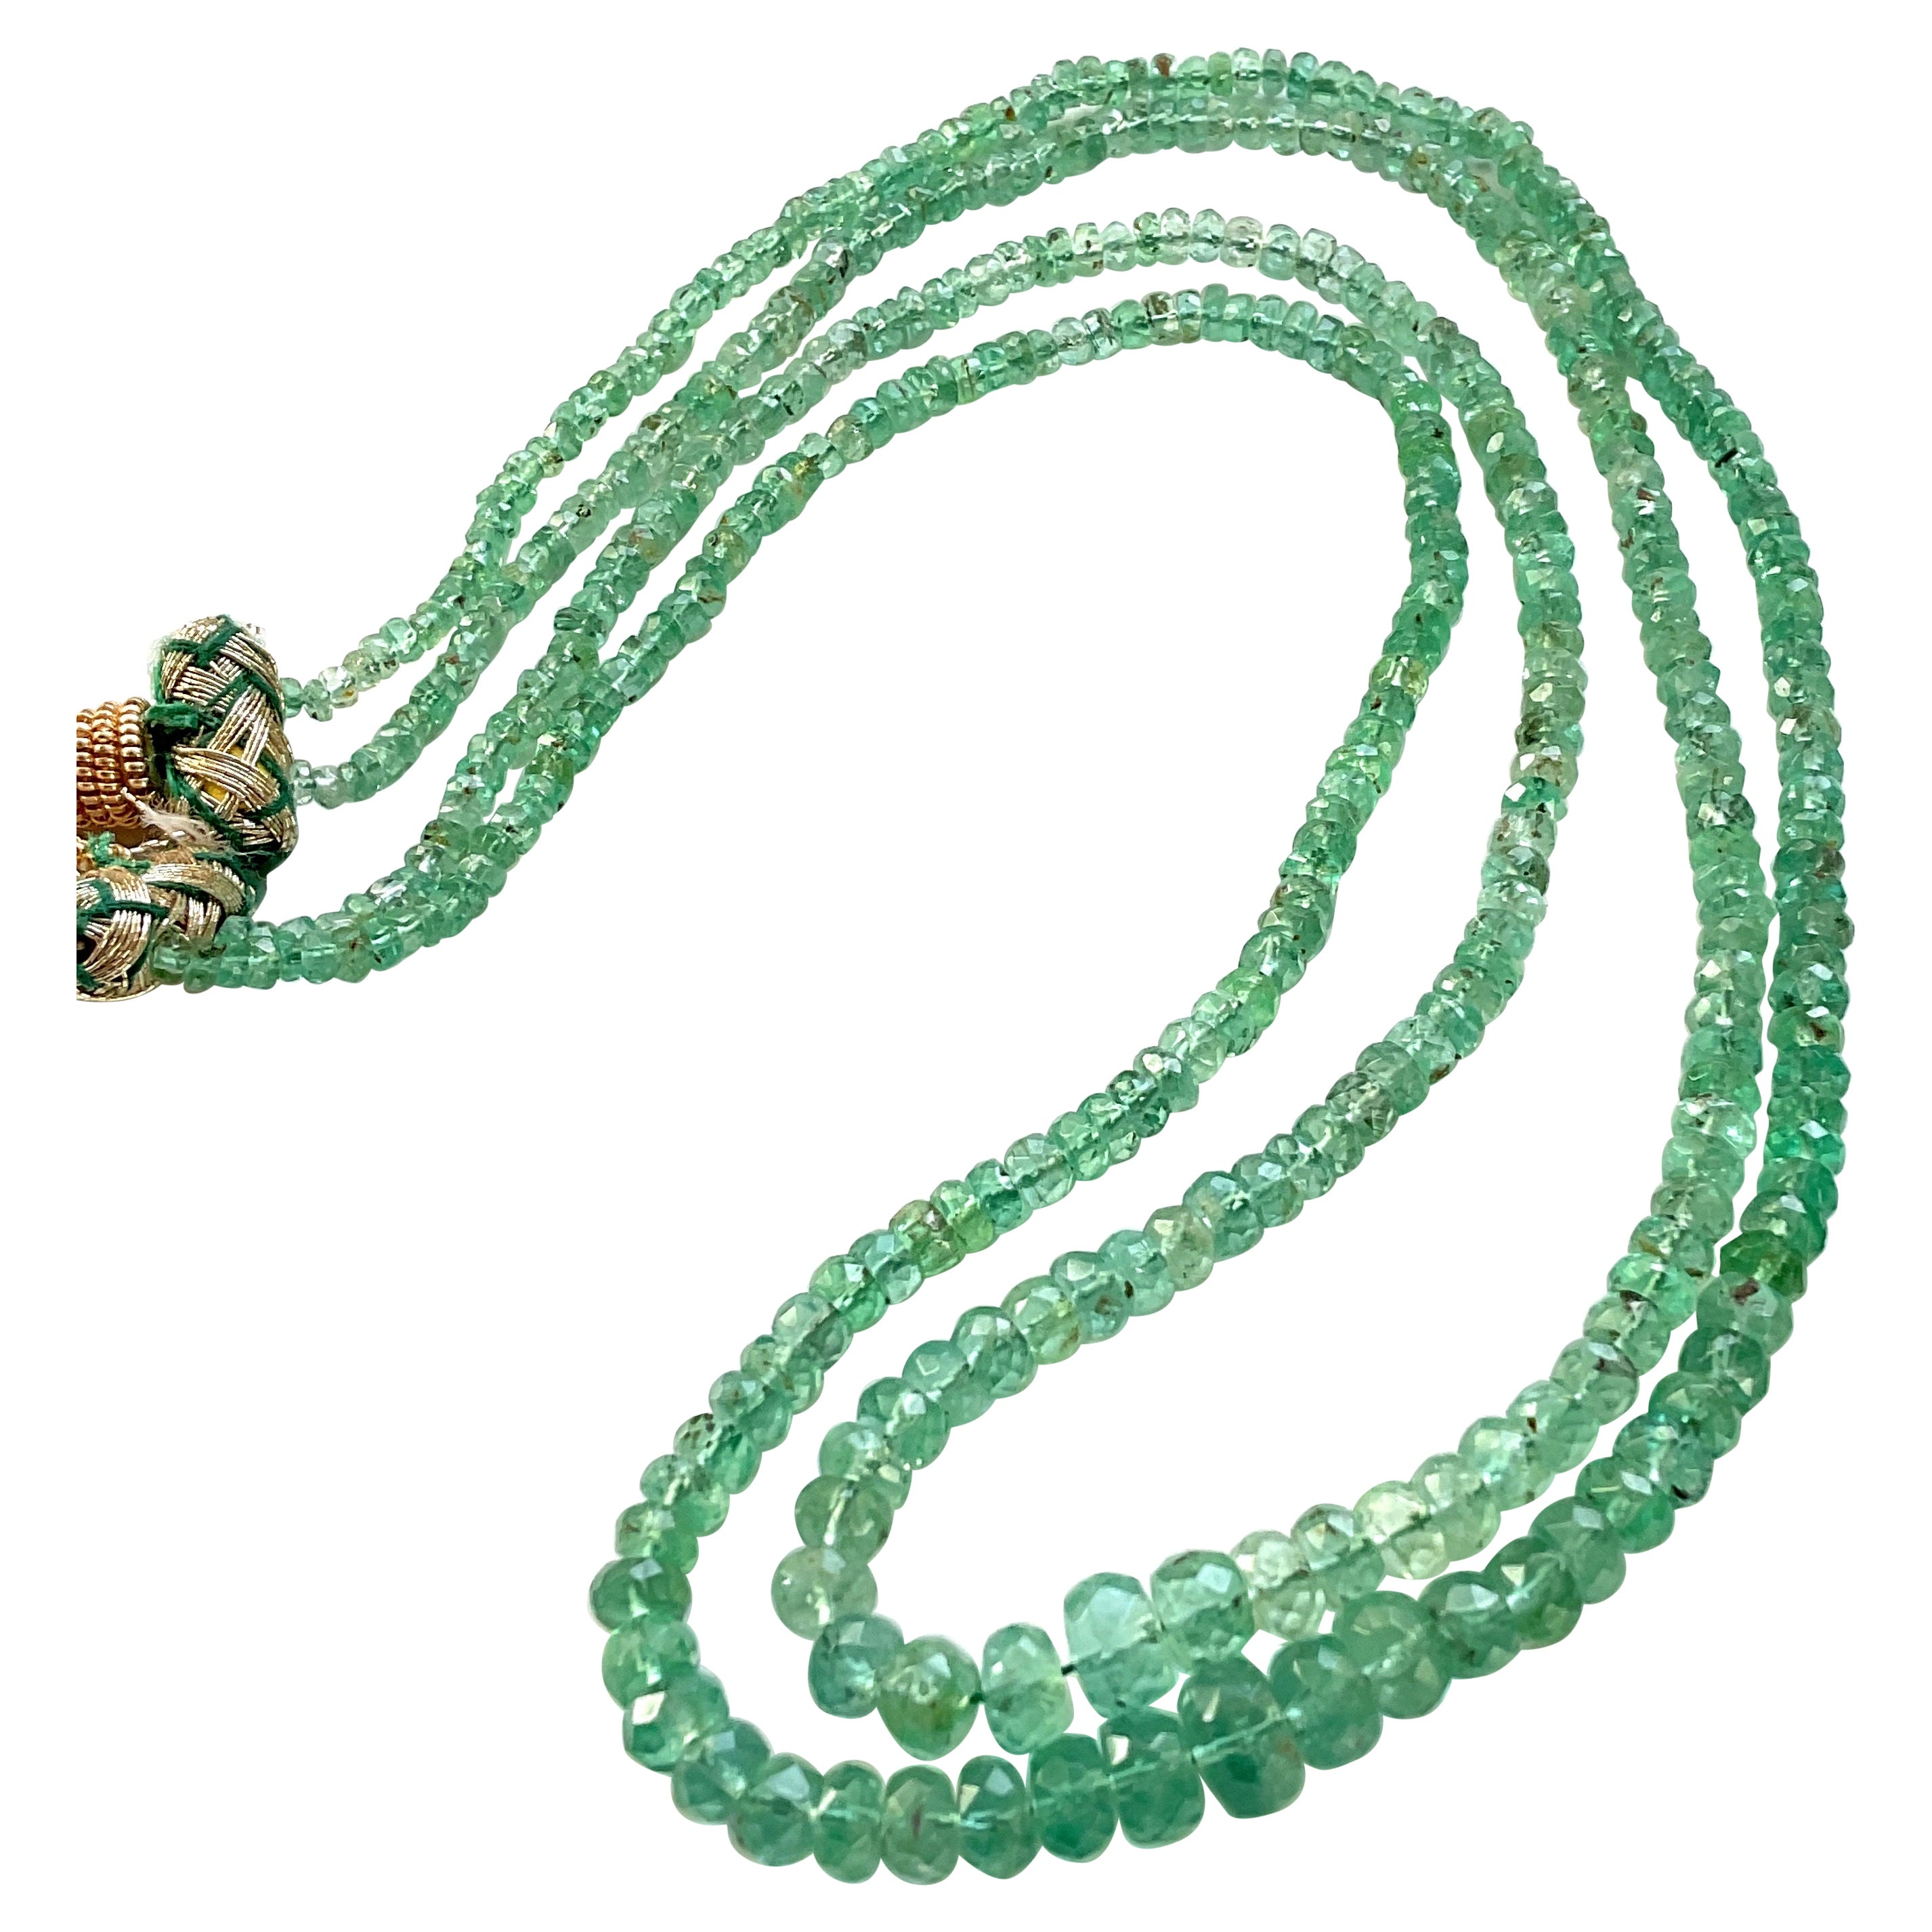 65.30 Carats Panjshir Emerald Faceted Beads For Fine Jewelry Natural Gemstone For Sale